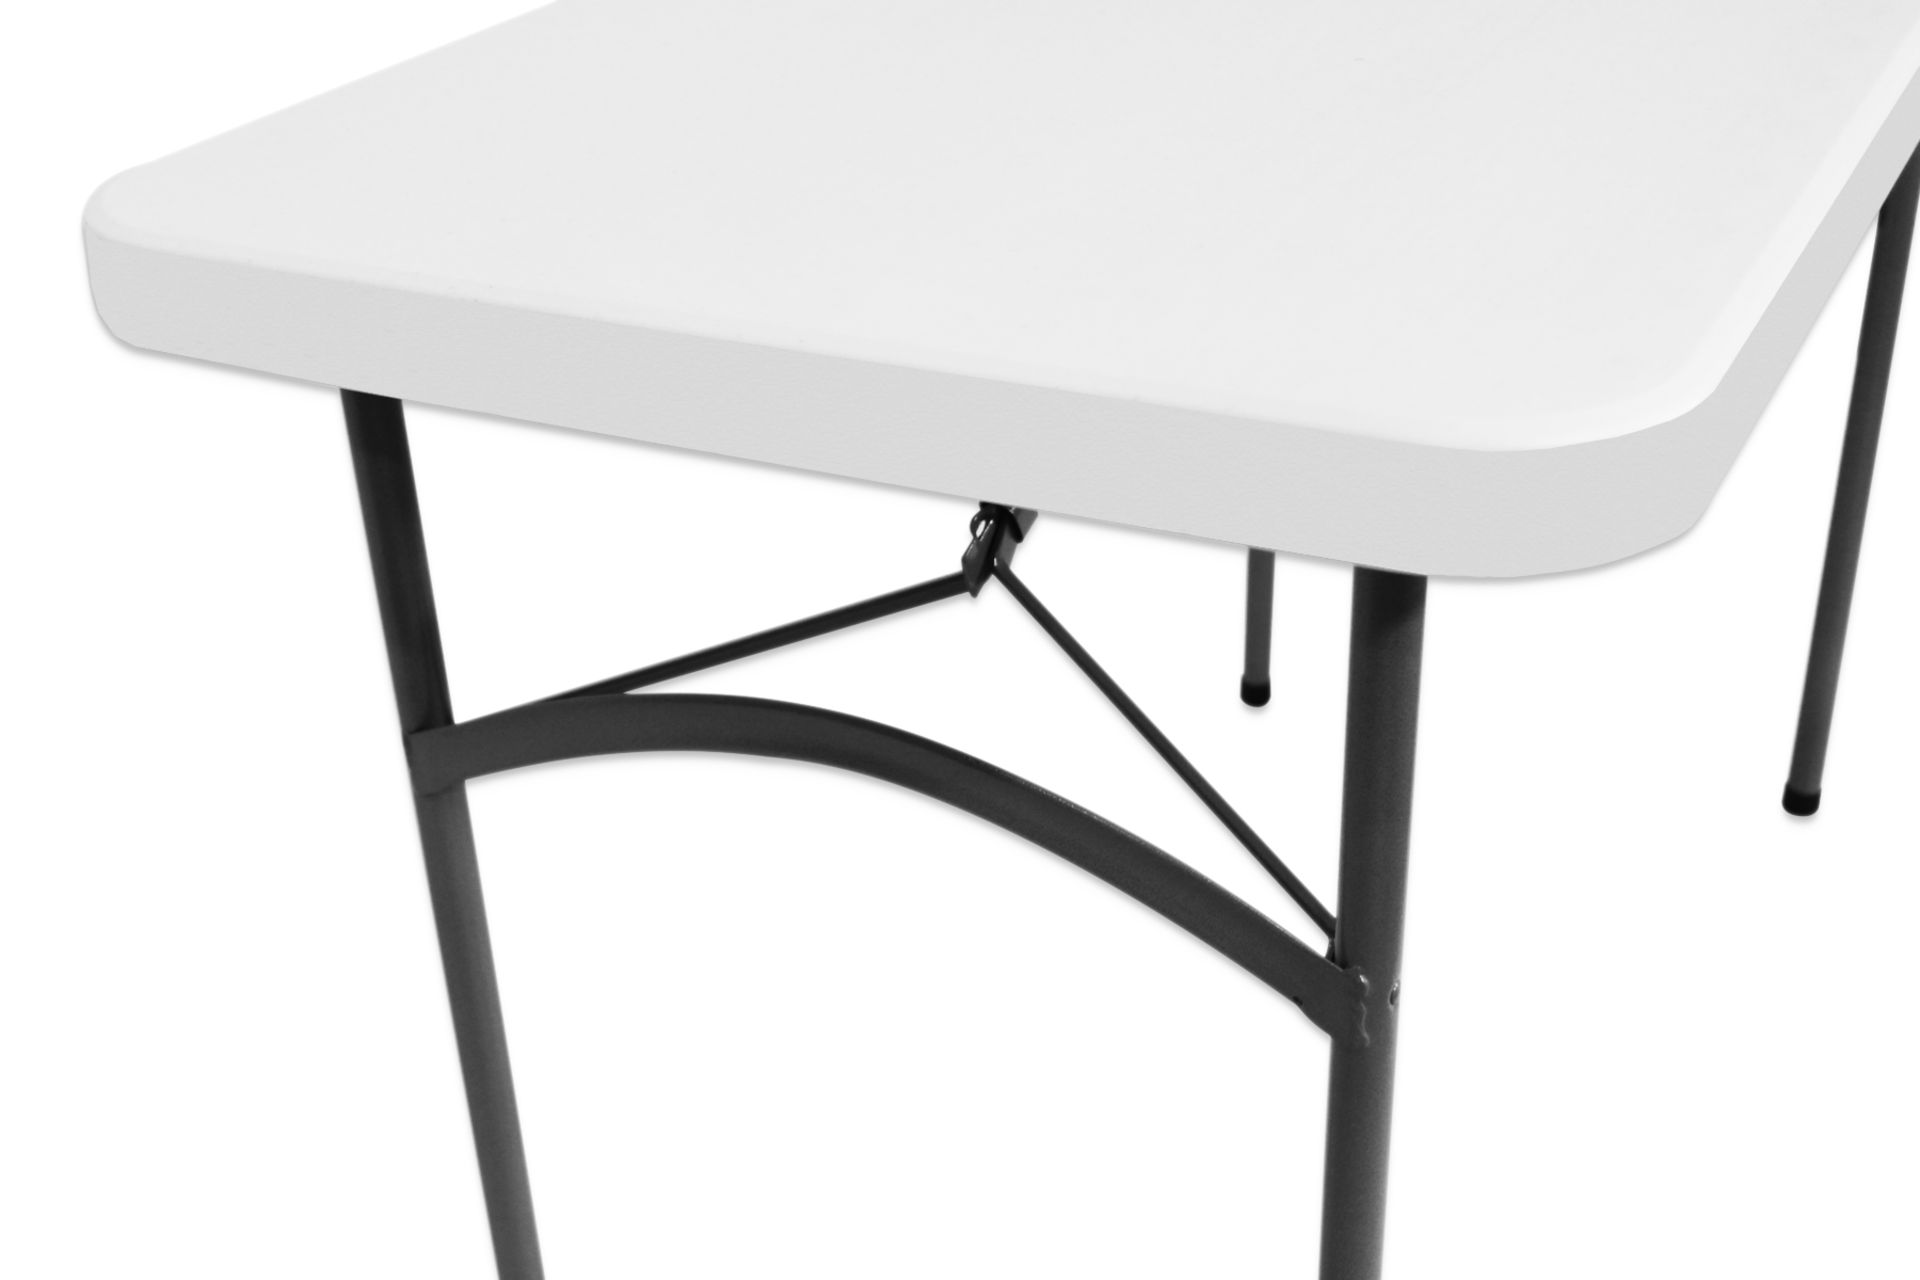 V *TRADE QTY* Grade A 4ft Plastic Trestle Table X250 YOUR BID PRICE TO BE MULTIPLIED BY TWO - Image 3 of 4